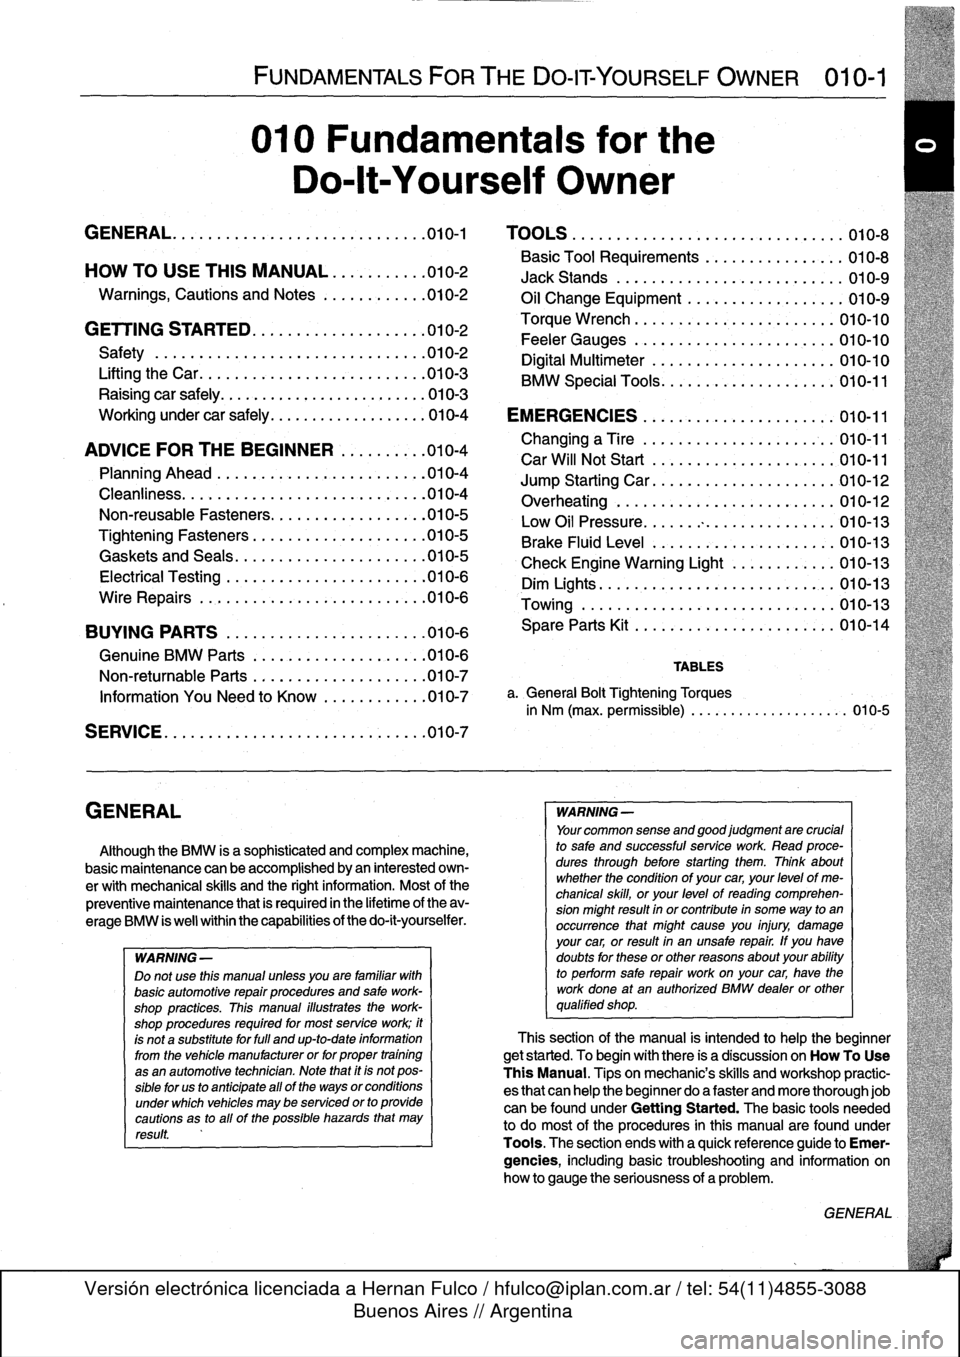 BMW 325i 1994 E36 Workshop Manual 
GENERAL

FUNDAMENTALS
FORTHE
DO-IT
YOURSELF
OWNER

	

010-1

010
Fundamentals
for
the

Do-lt-Yourself
Owner

GENERAL
.......
.
.
.
......
.
.........
.
.
.010-1

	

TOOLS
.
.
...
.
............
.
...